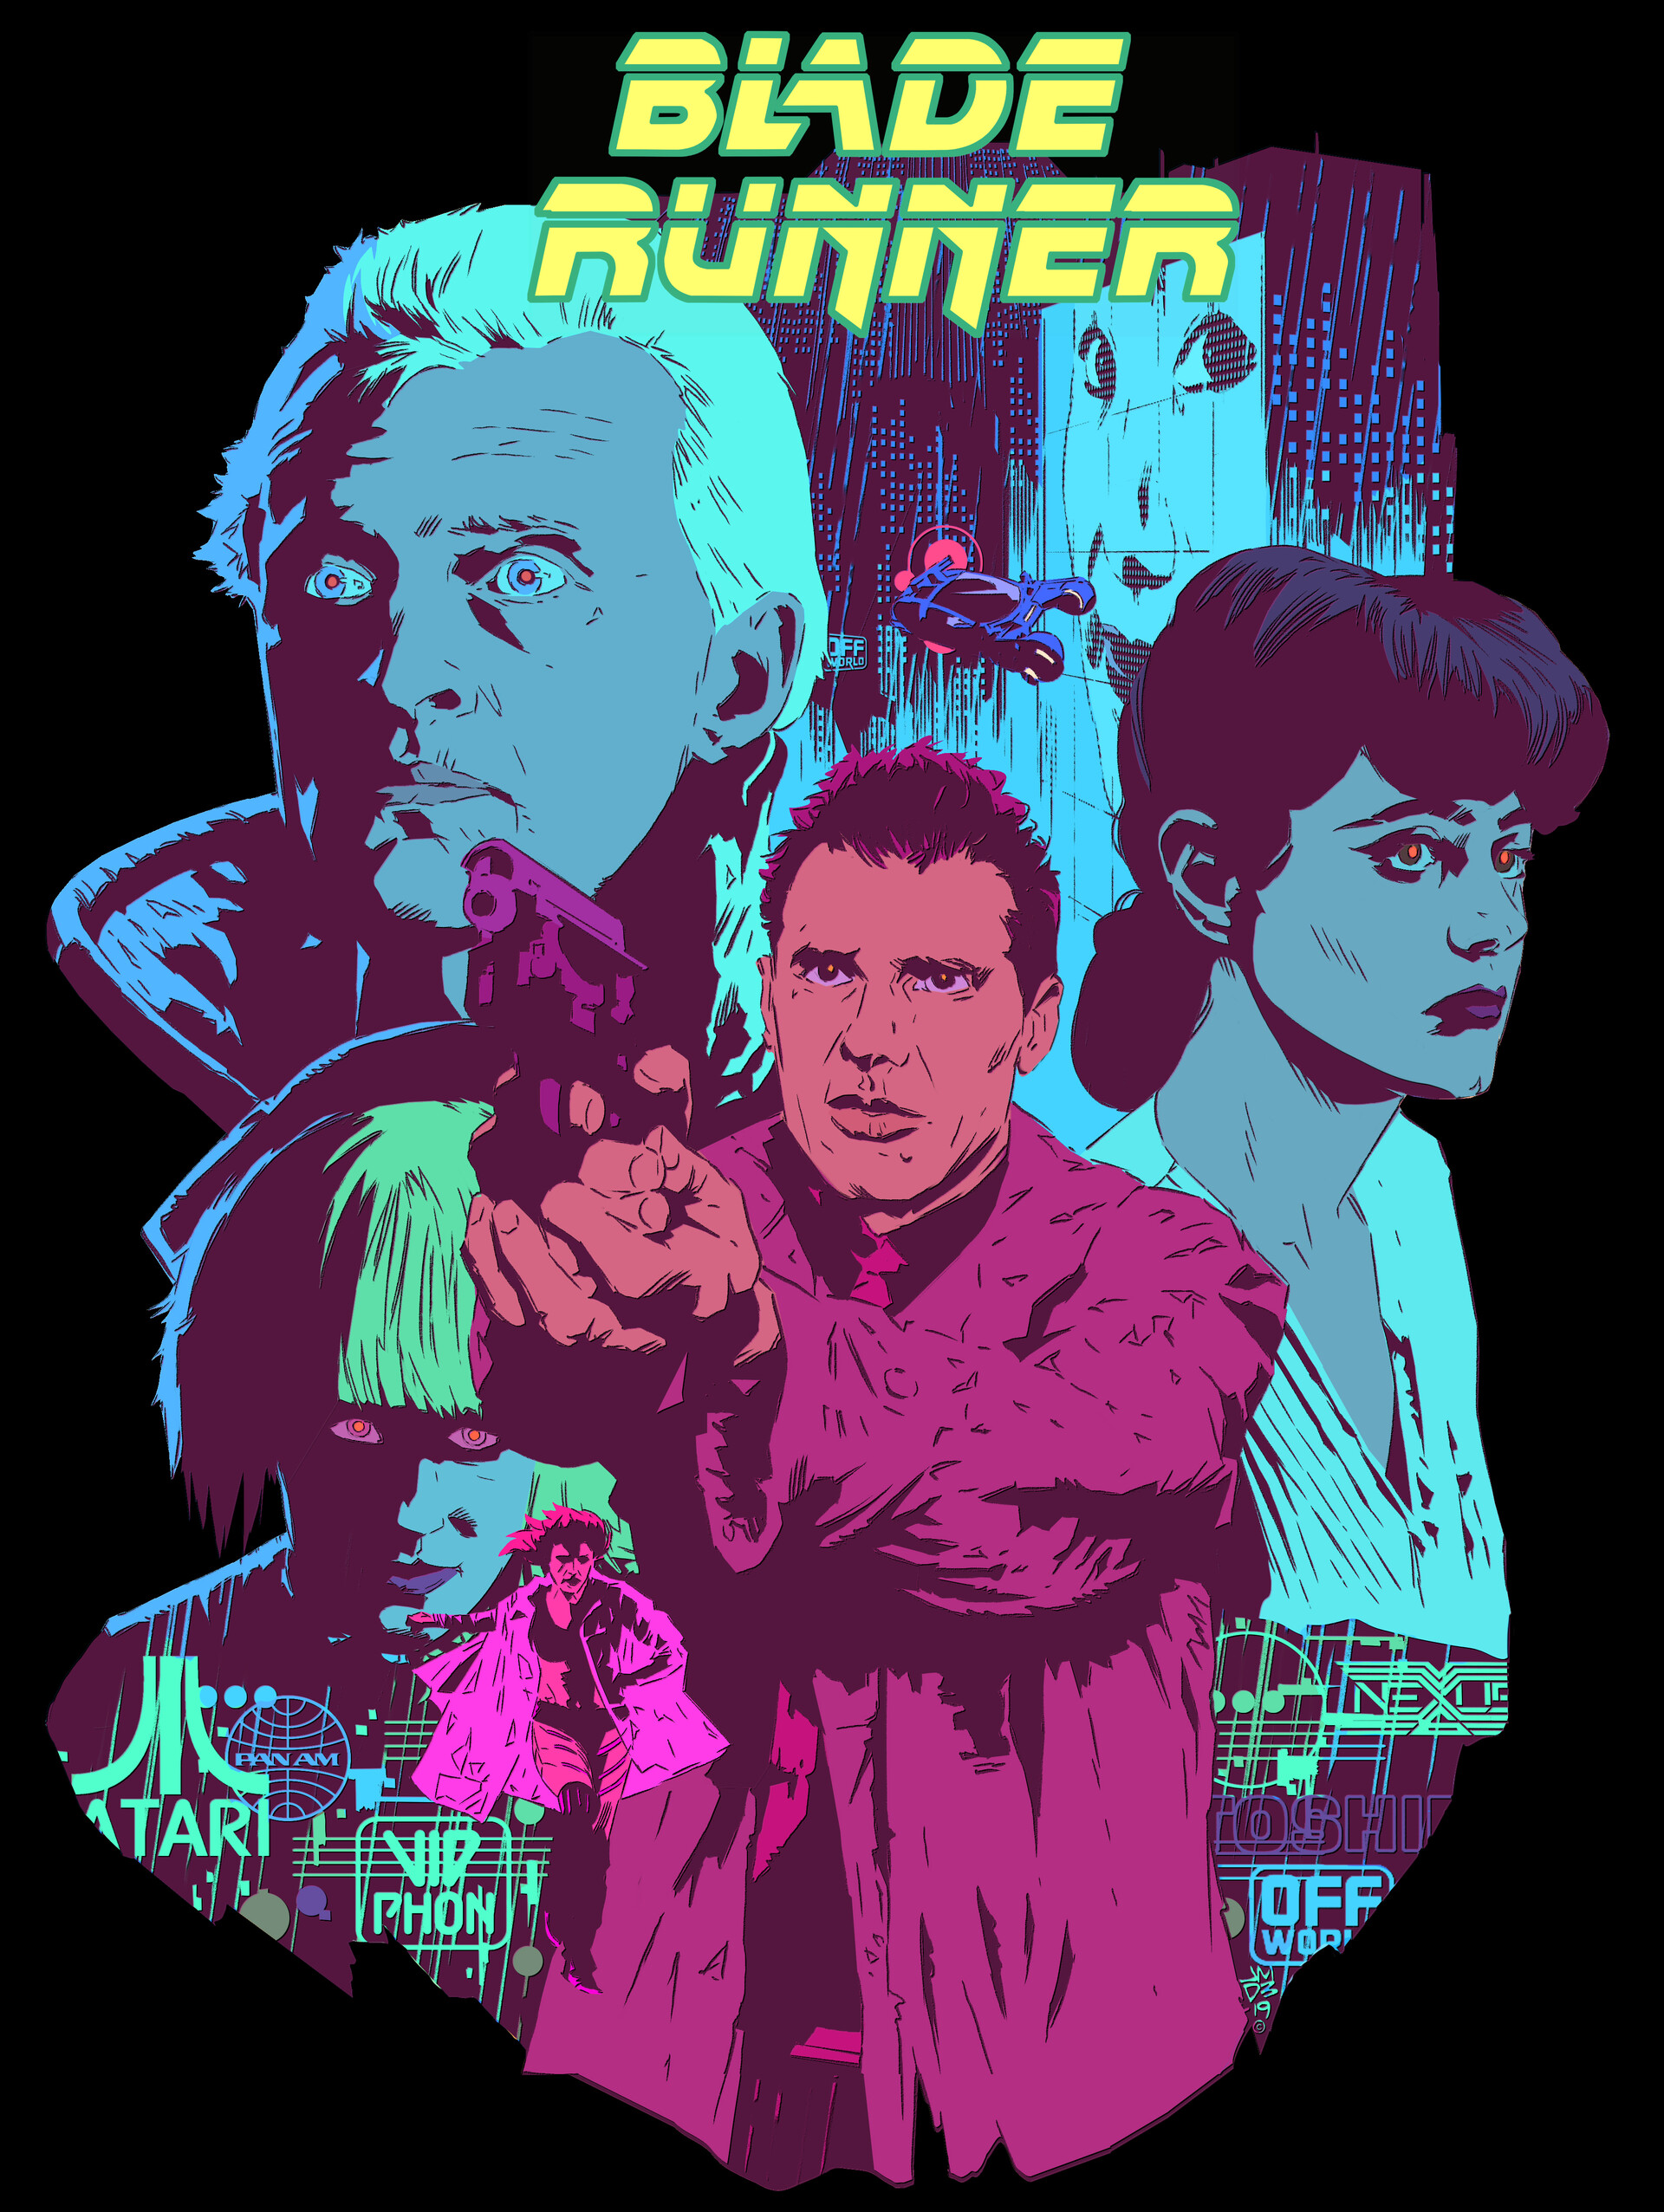 Blade Runner Art by James Daly